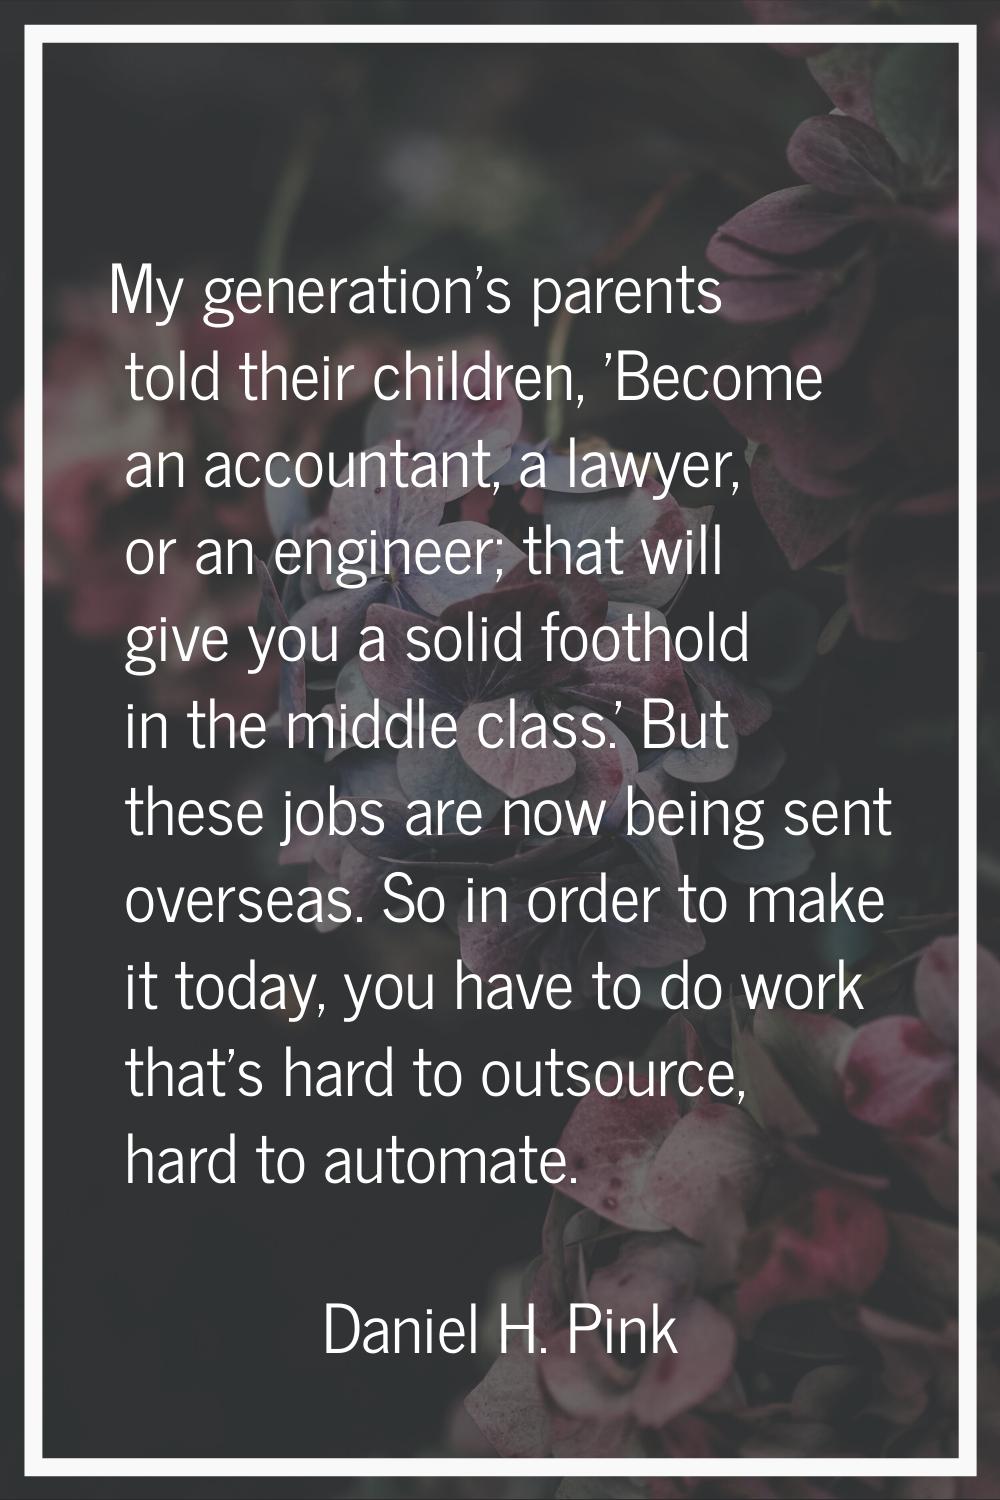 My generation's parents told their children, 'Become an accountant, a lawyer, or an engineer; that 